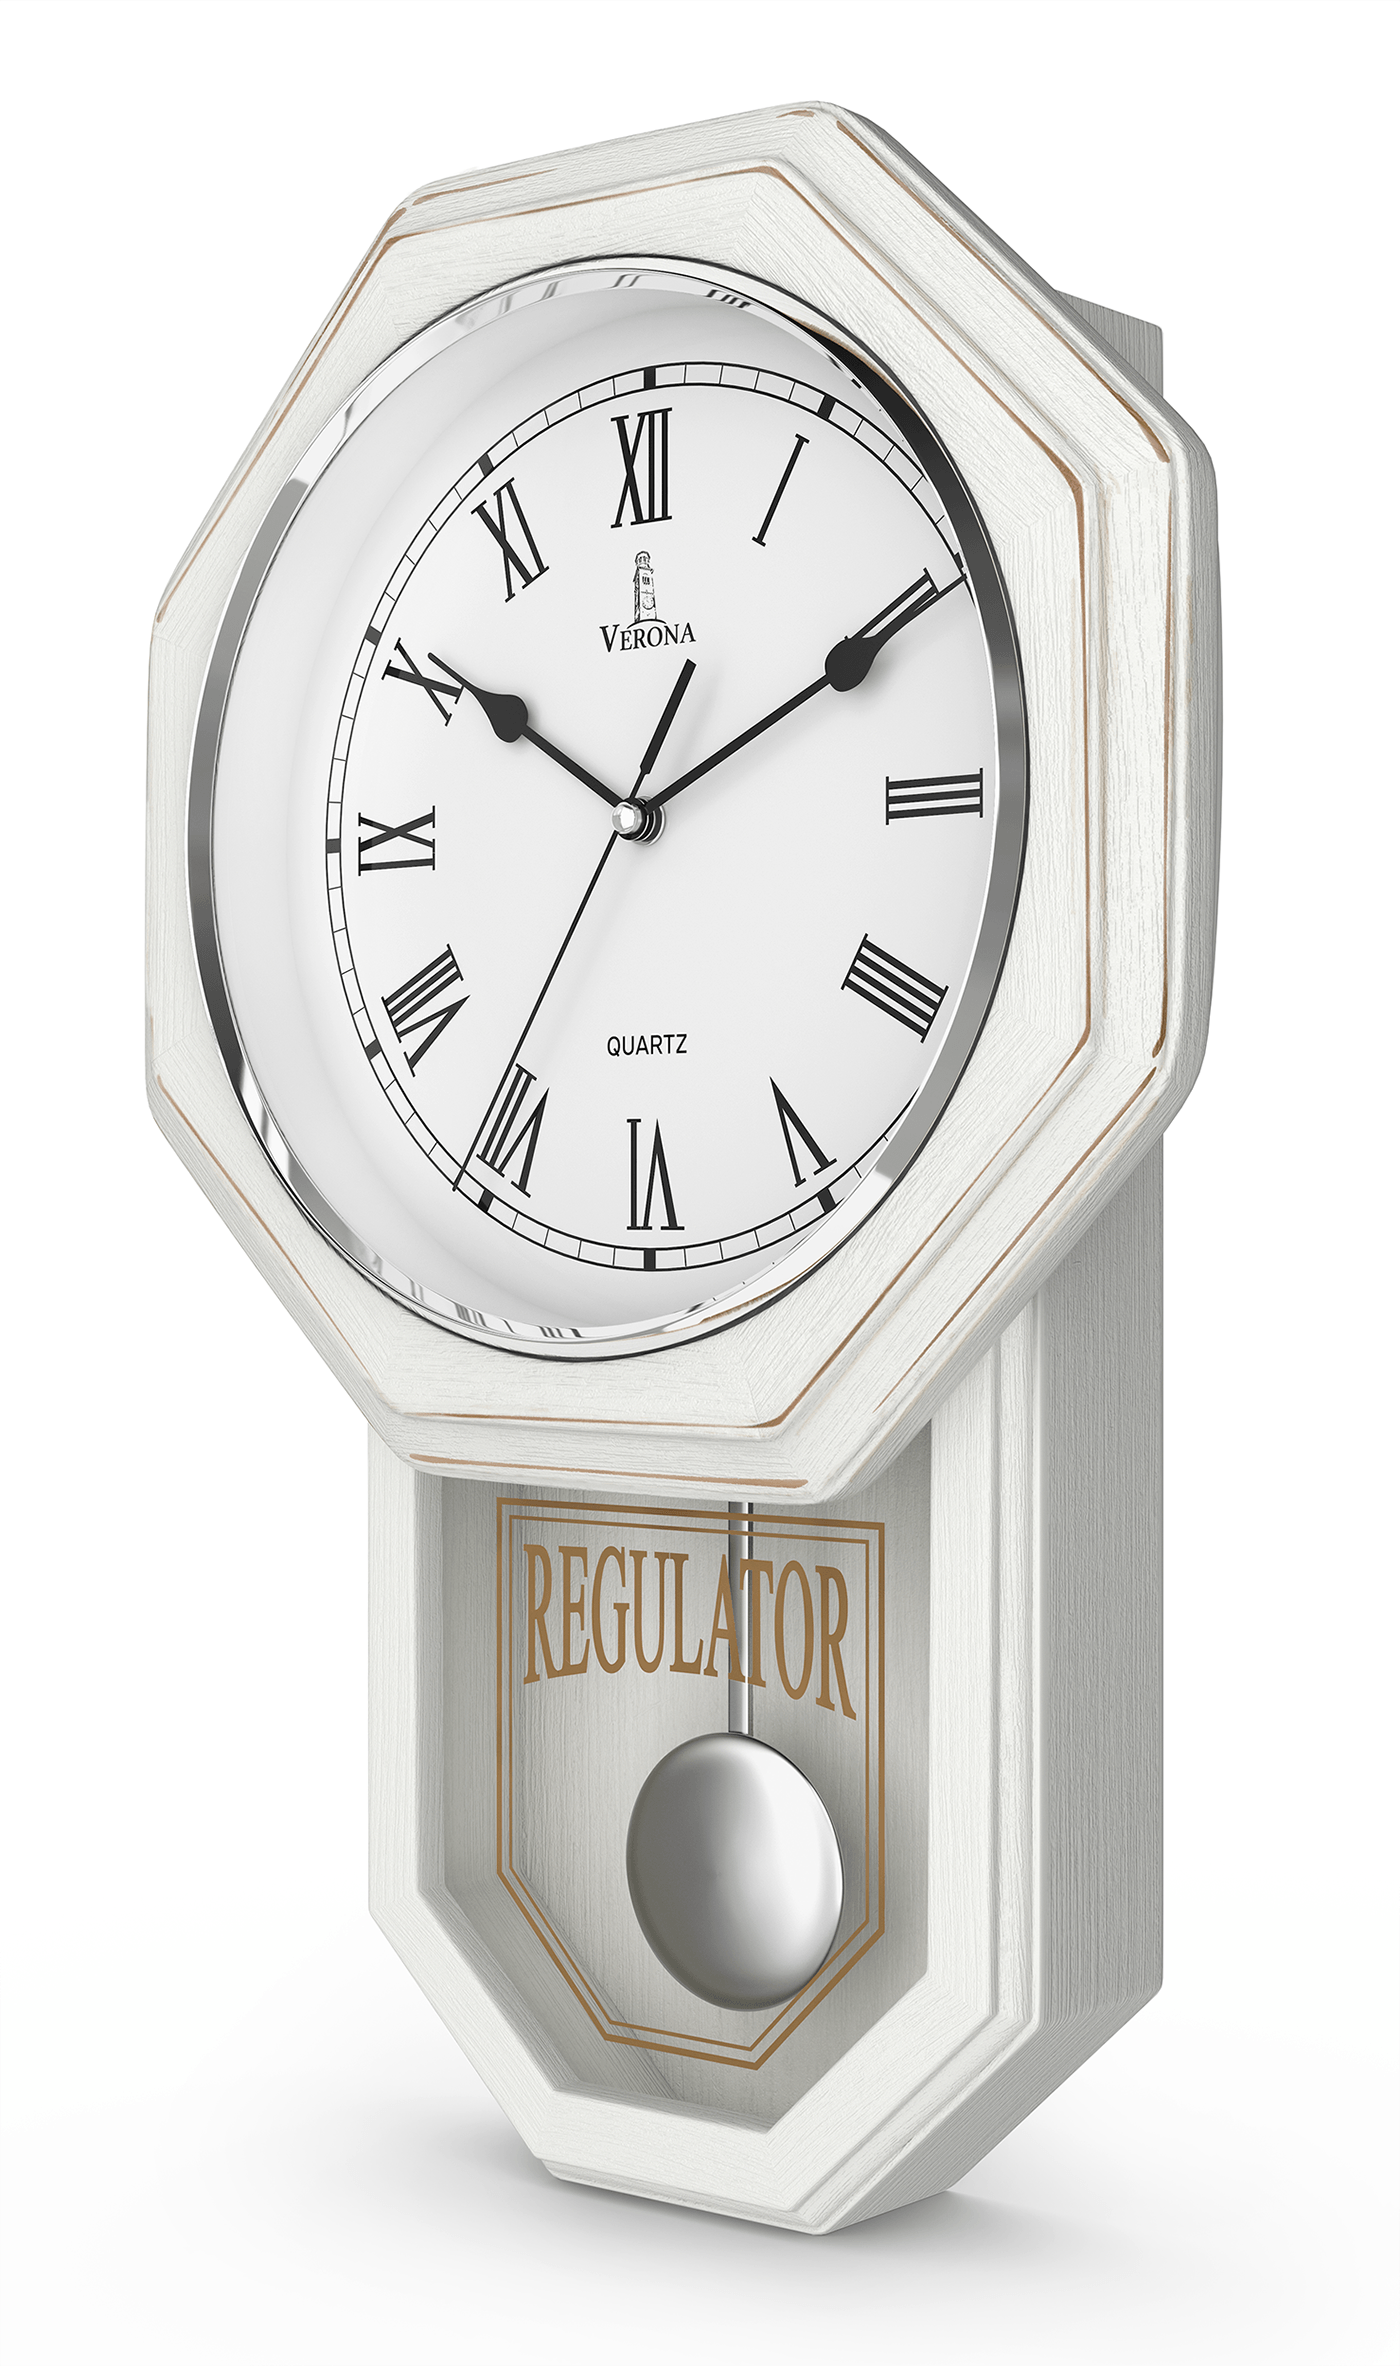 3ds max Render vray architecture clock pendulum 3dmodeling texturing CGI visualization